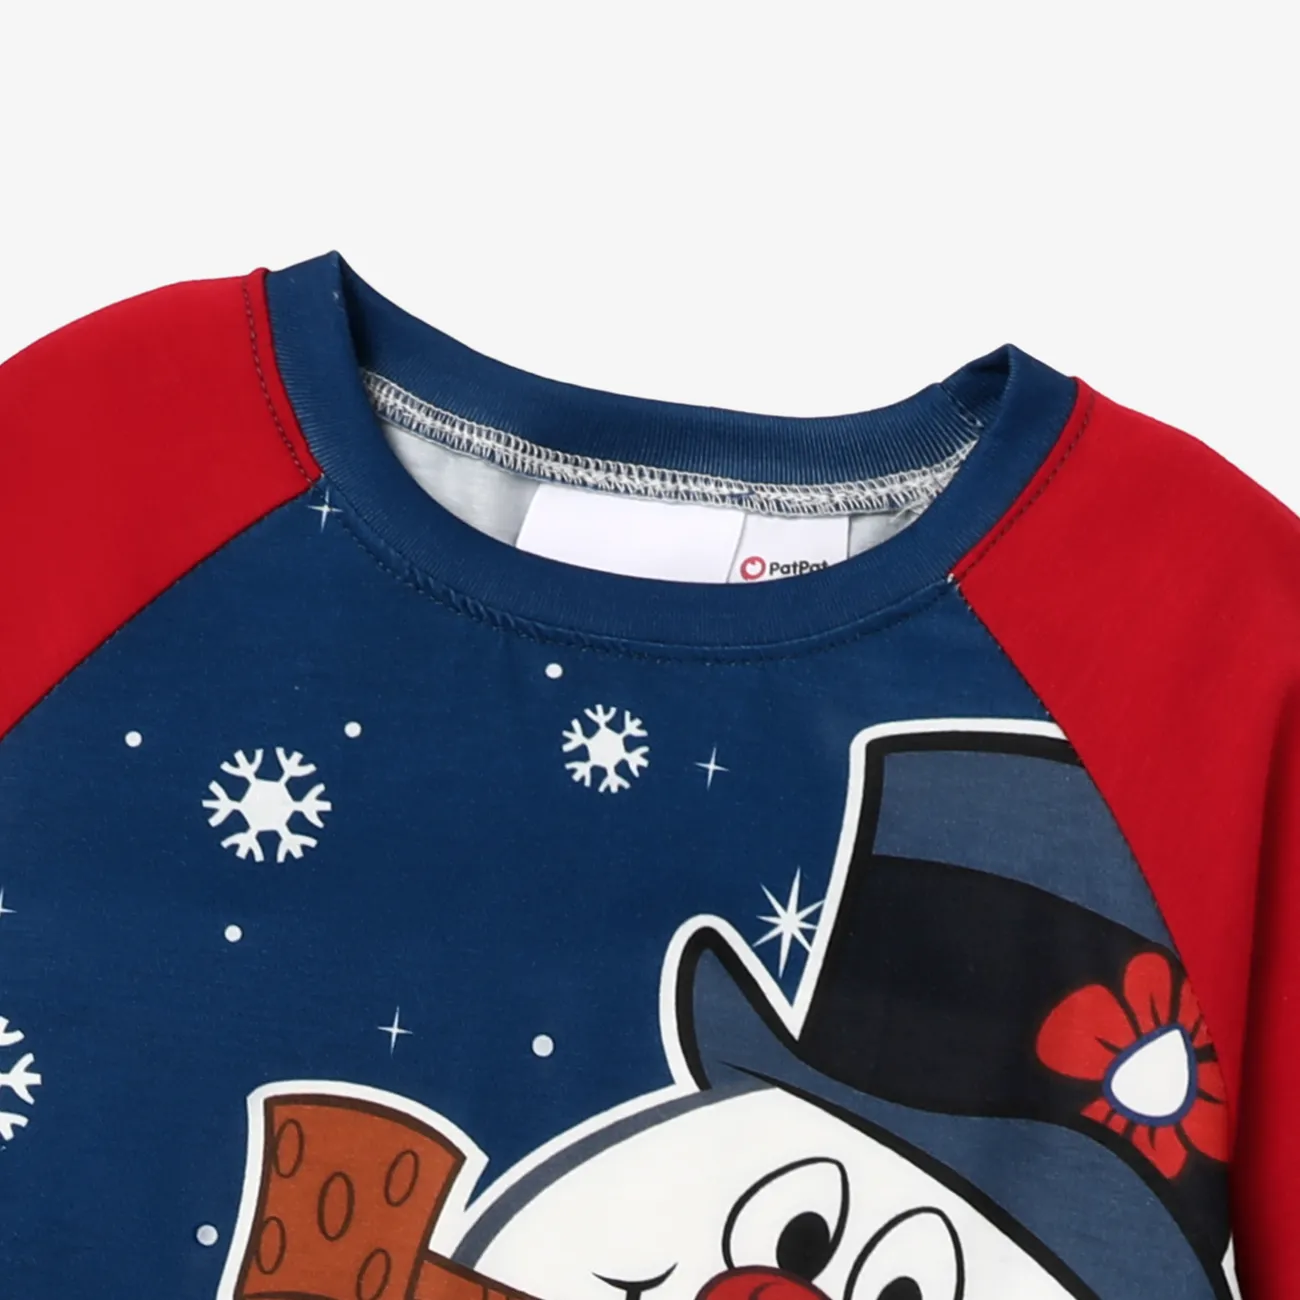 Frosty The Snowman Family Matching Christmas Long-sleeve Pajamas(flame resistance)
 Multi-color big image 1